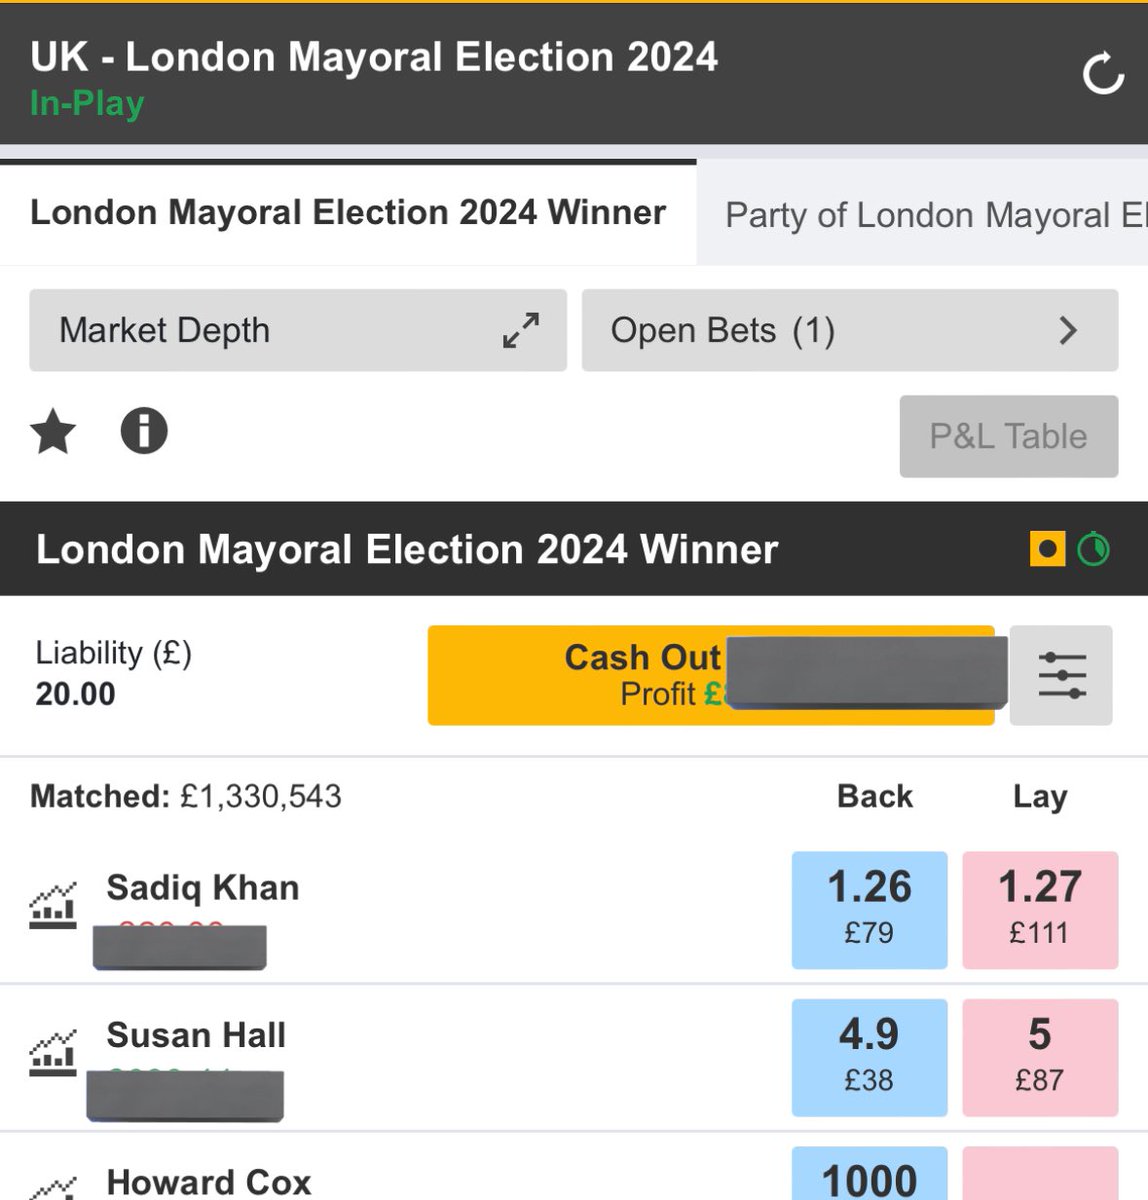 Susan Hall is now into 4-1 on the Betfair London Mayor market,
Yesterday I got her at 32-1

It maybe be rumours, but my god would Londoners celebrate if that poisonous man was outed.